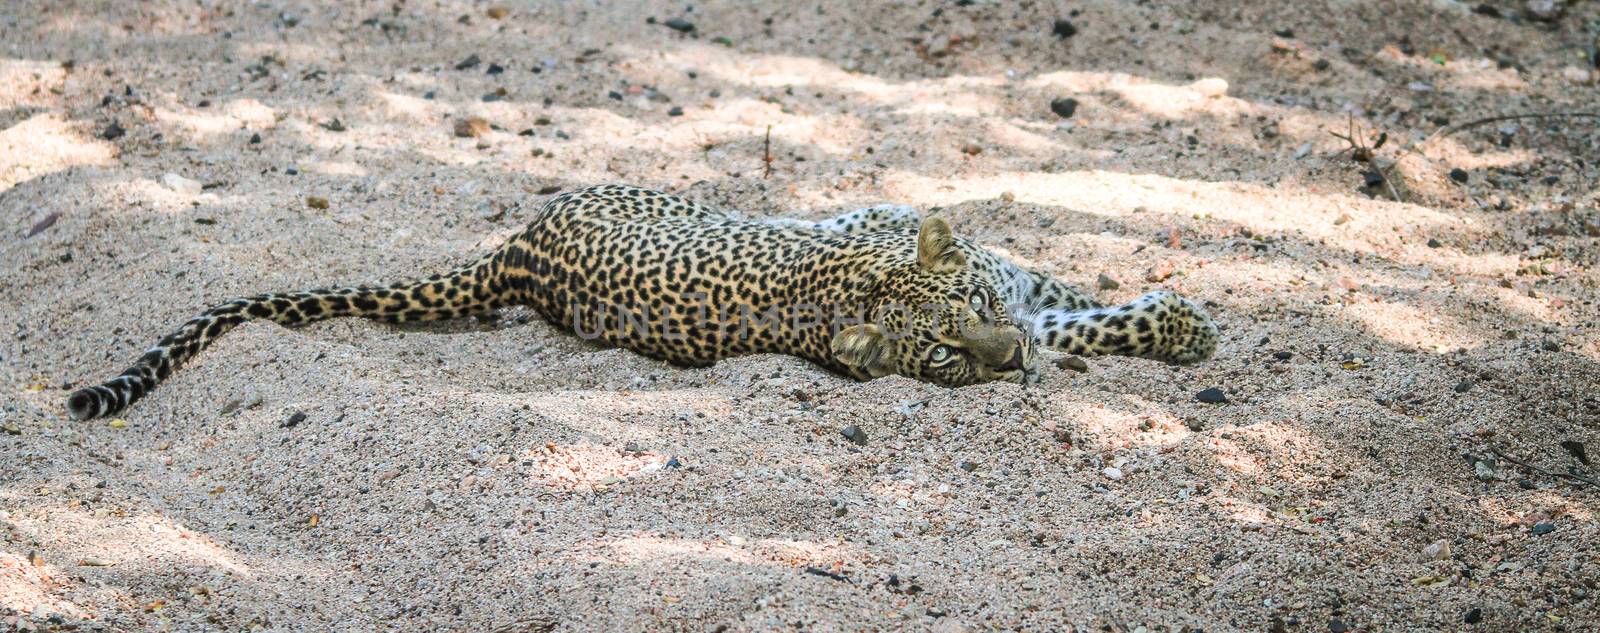 Leopard laying in the sand in the Sabi Sands, South Africa.